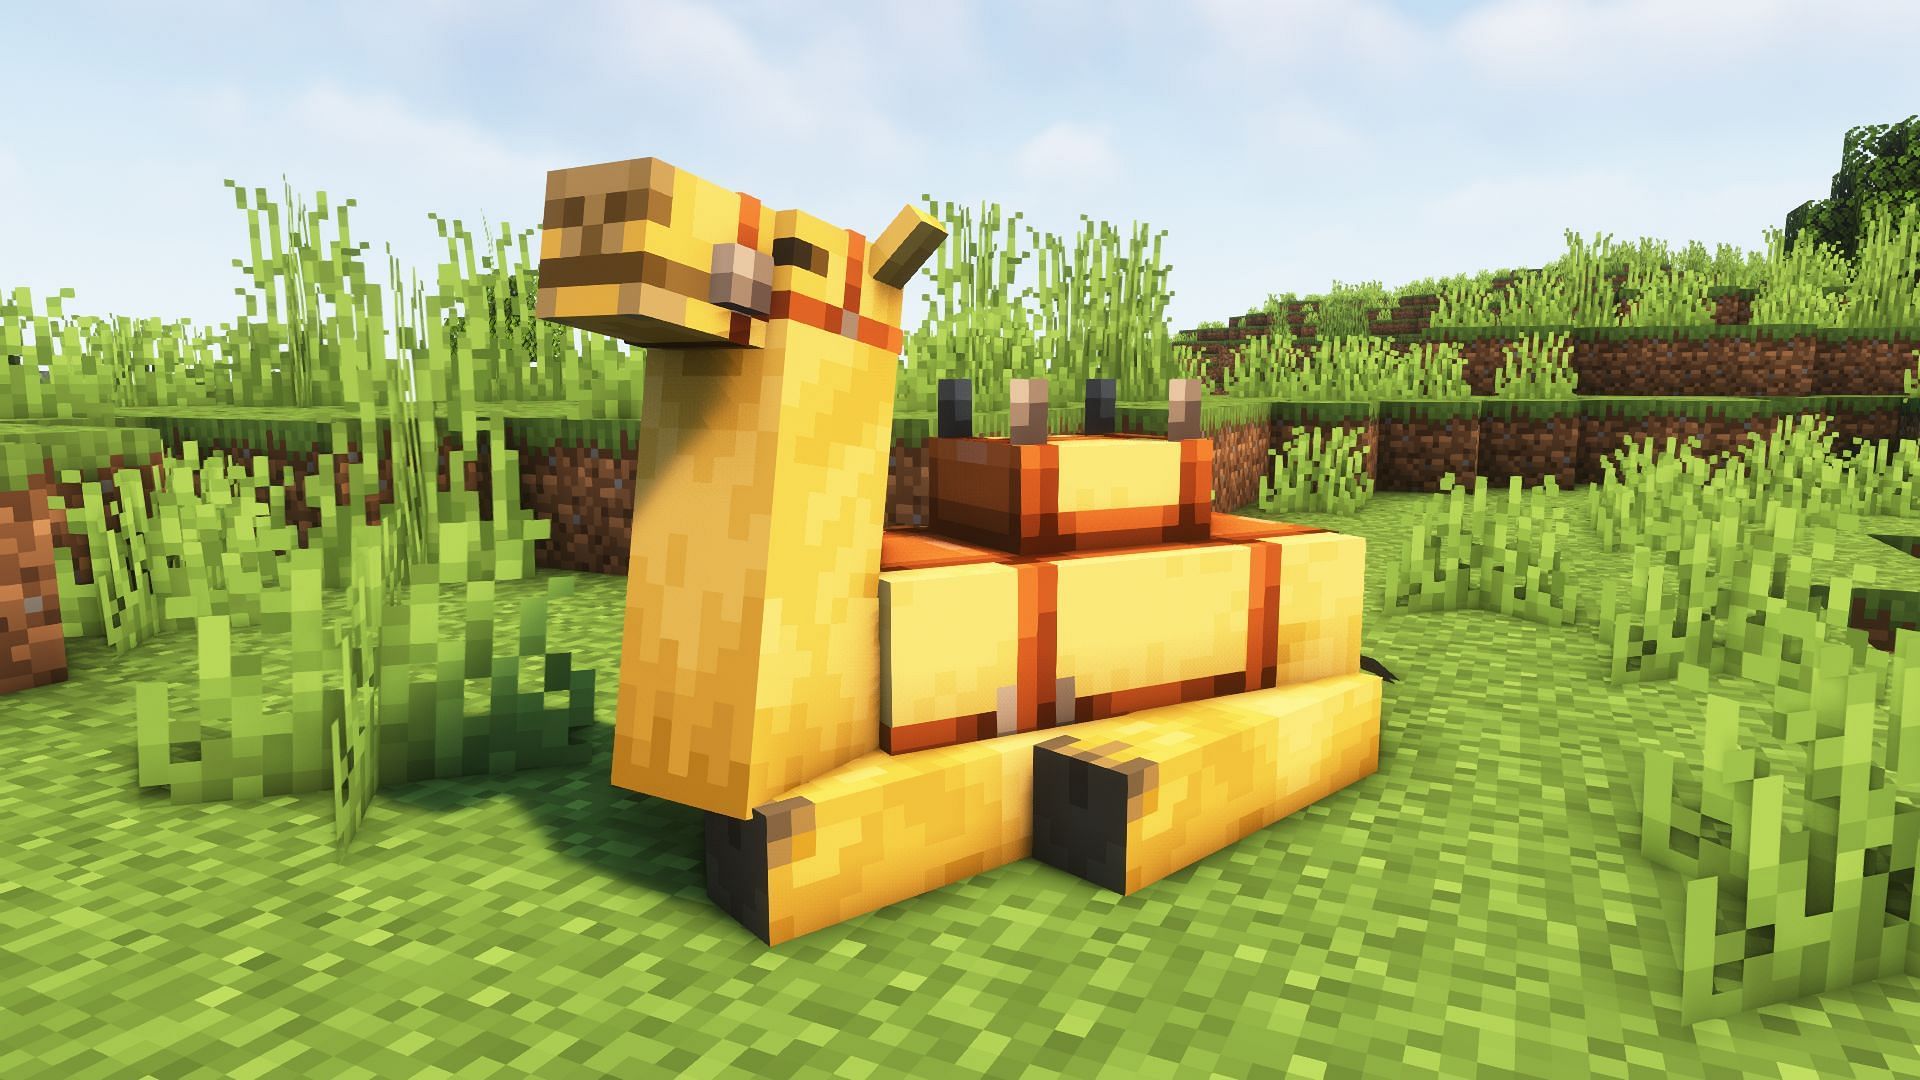 A camel in the game (Image via Mojang)